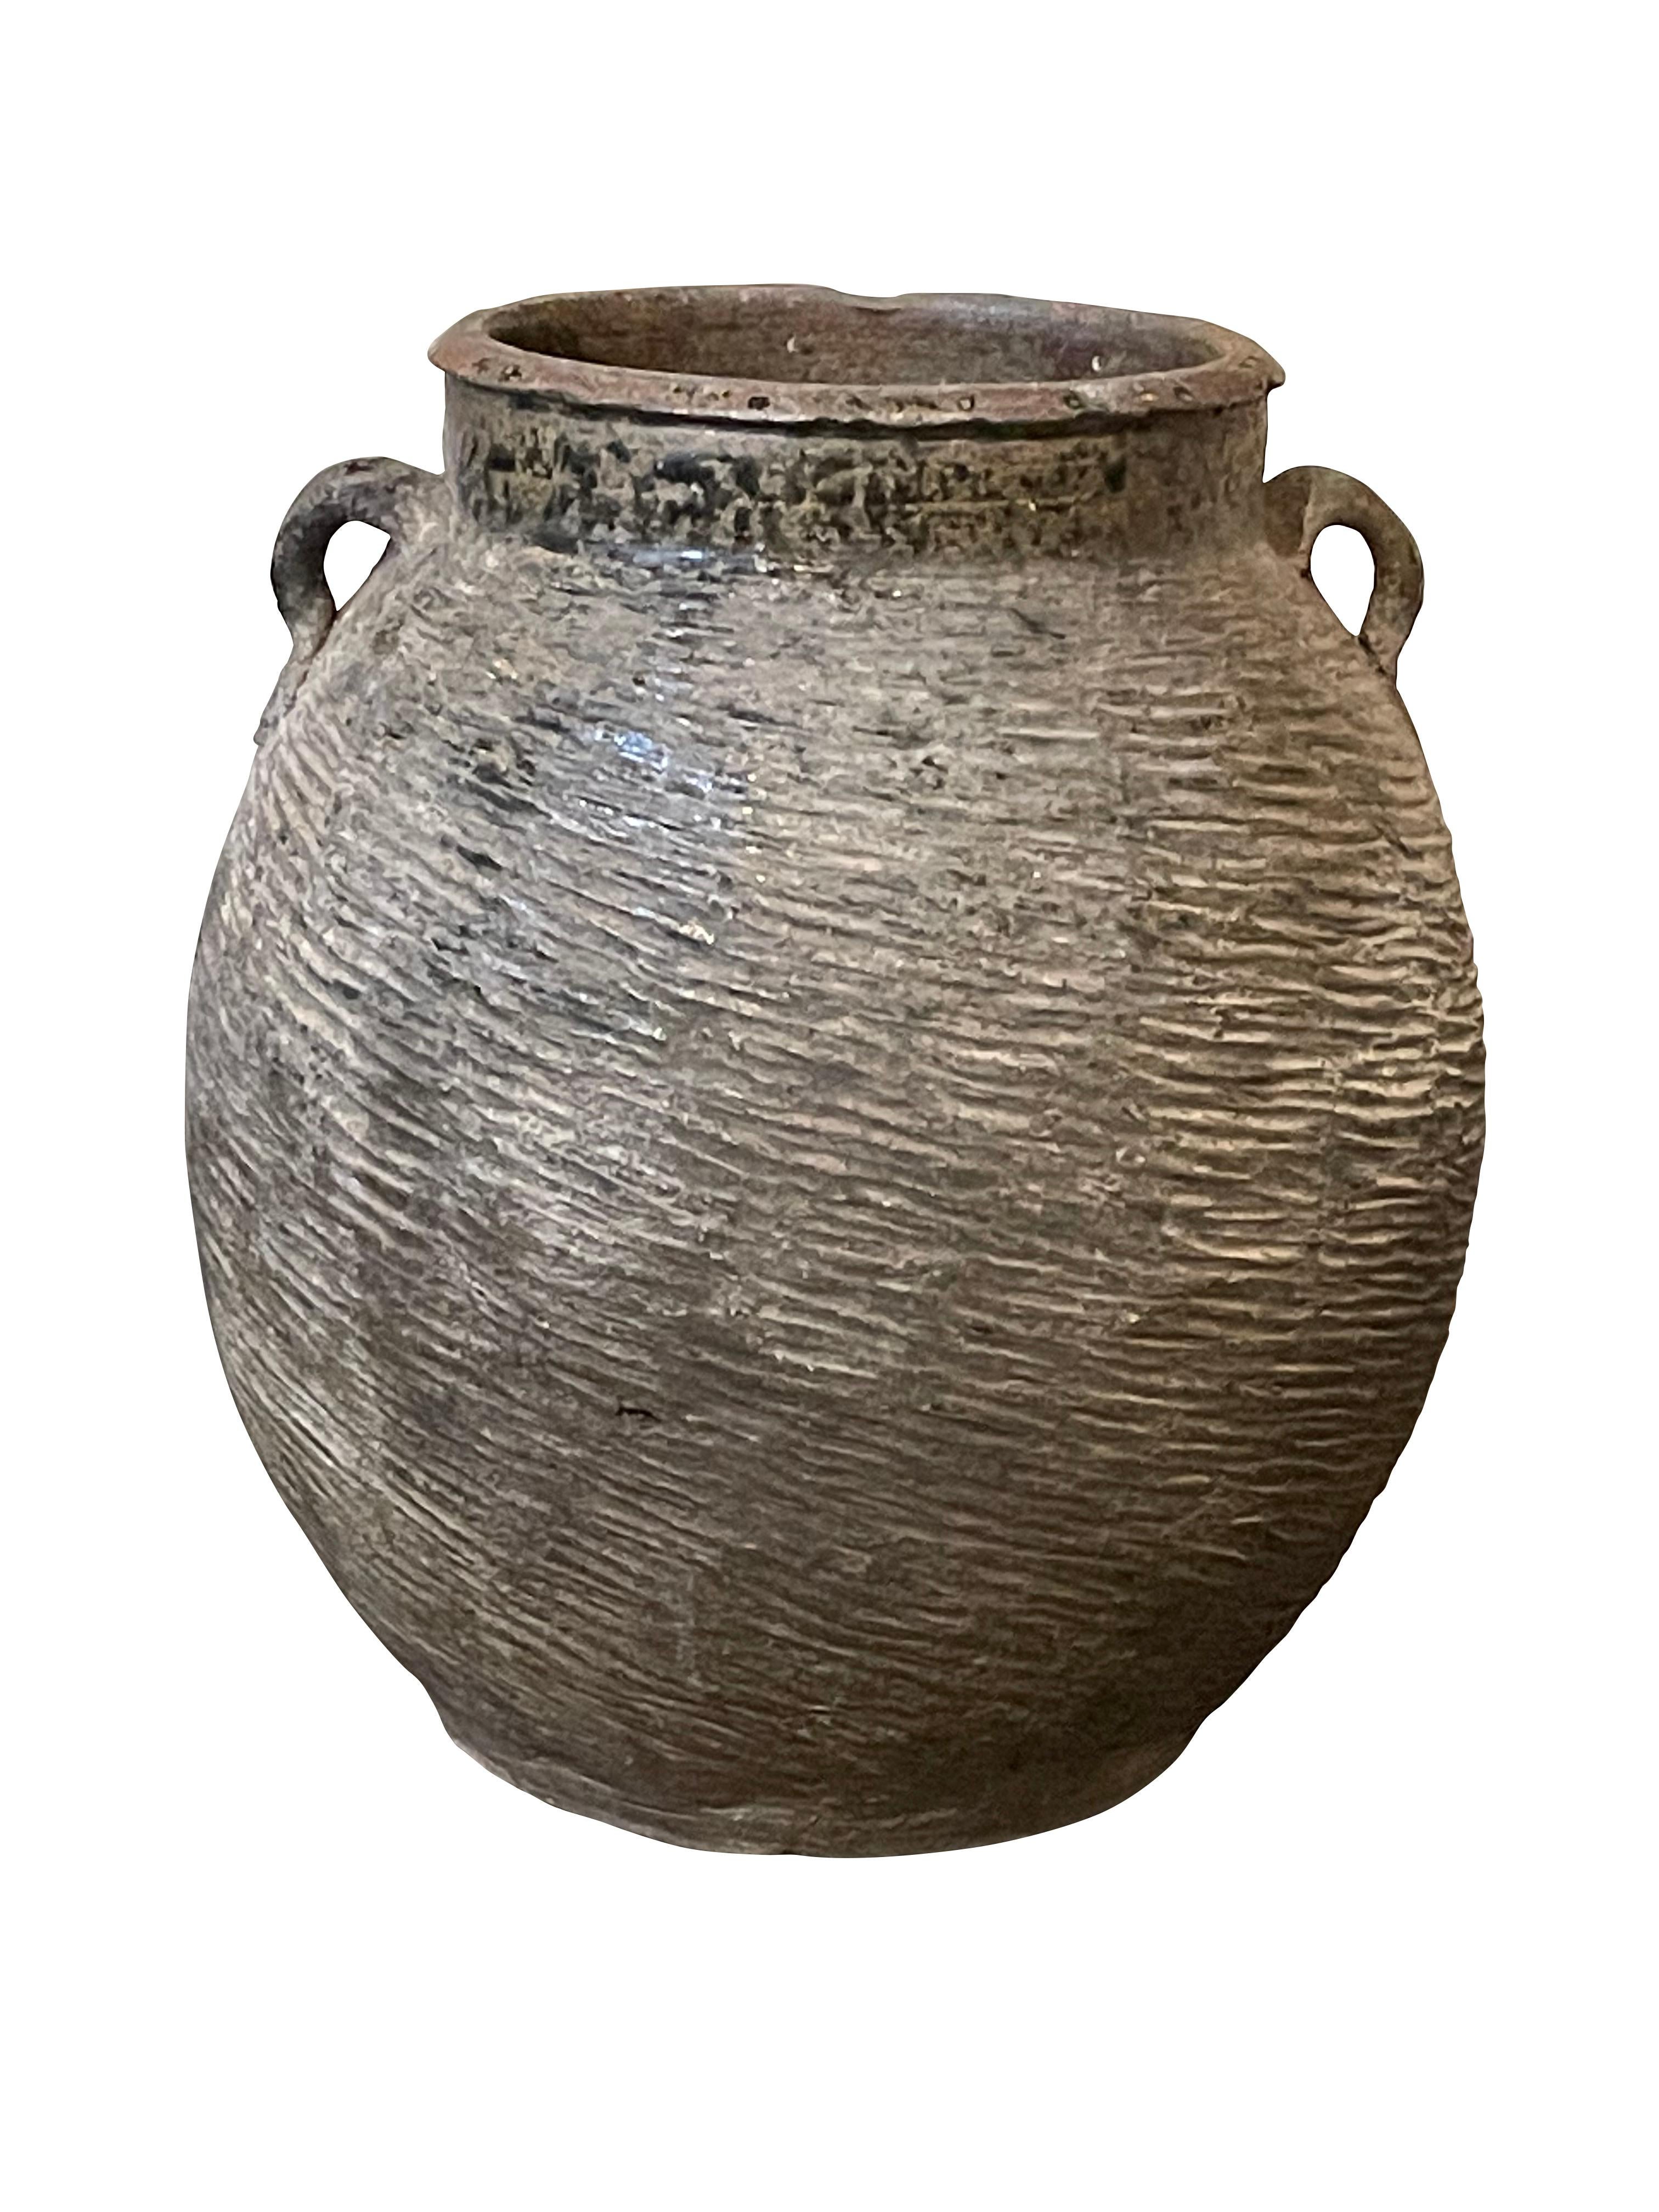 1940's Chinese horizontal rib textured vase with two small handles.
Weathered brown color.
Two available and sold individually.